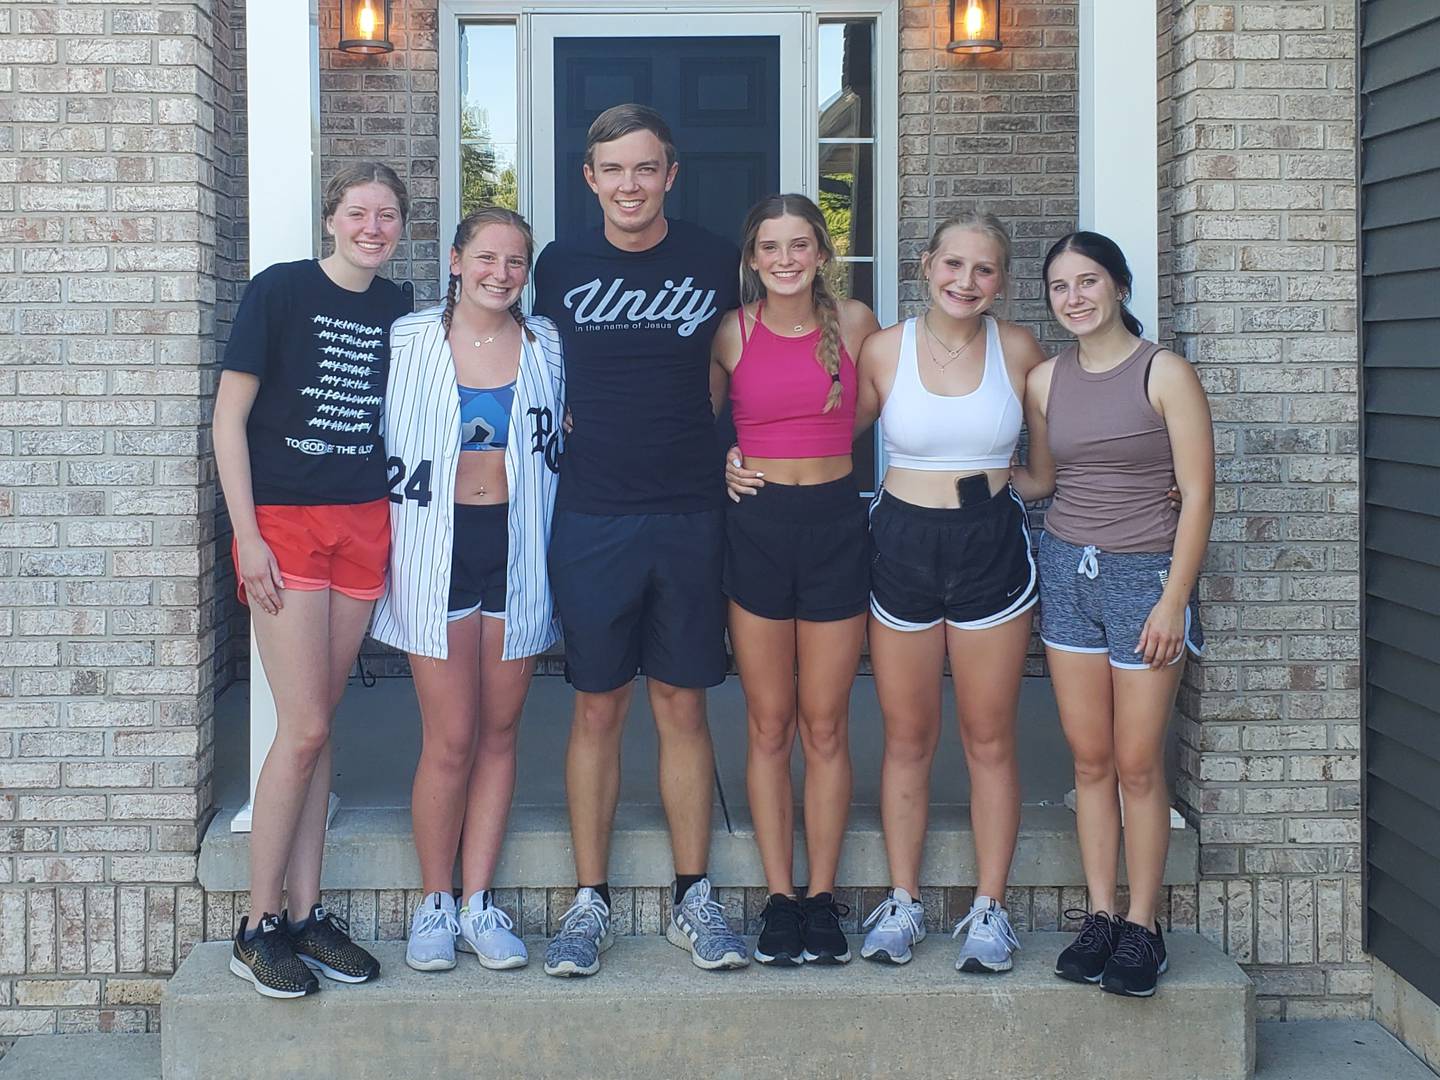 Starting at 7 p.m. on Wednesday and finishing at 6 p.m. on Thursday, Ciucci along with Emberlin Cwikla, McKinley Cwikla, Justin Cawthon, Molly Roach and Lauren Faletti completed the challenge with full hearts, tired legs and cheers of support.